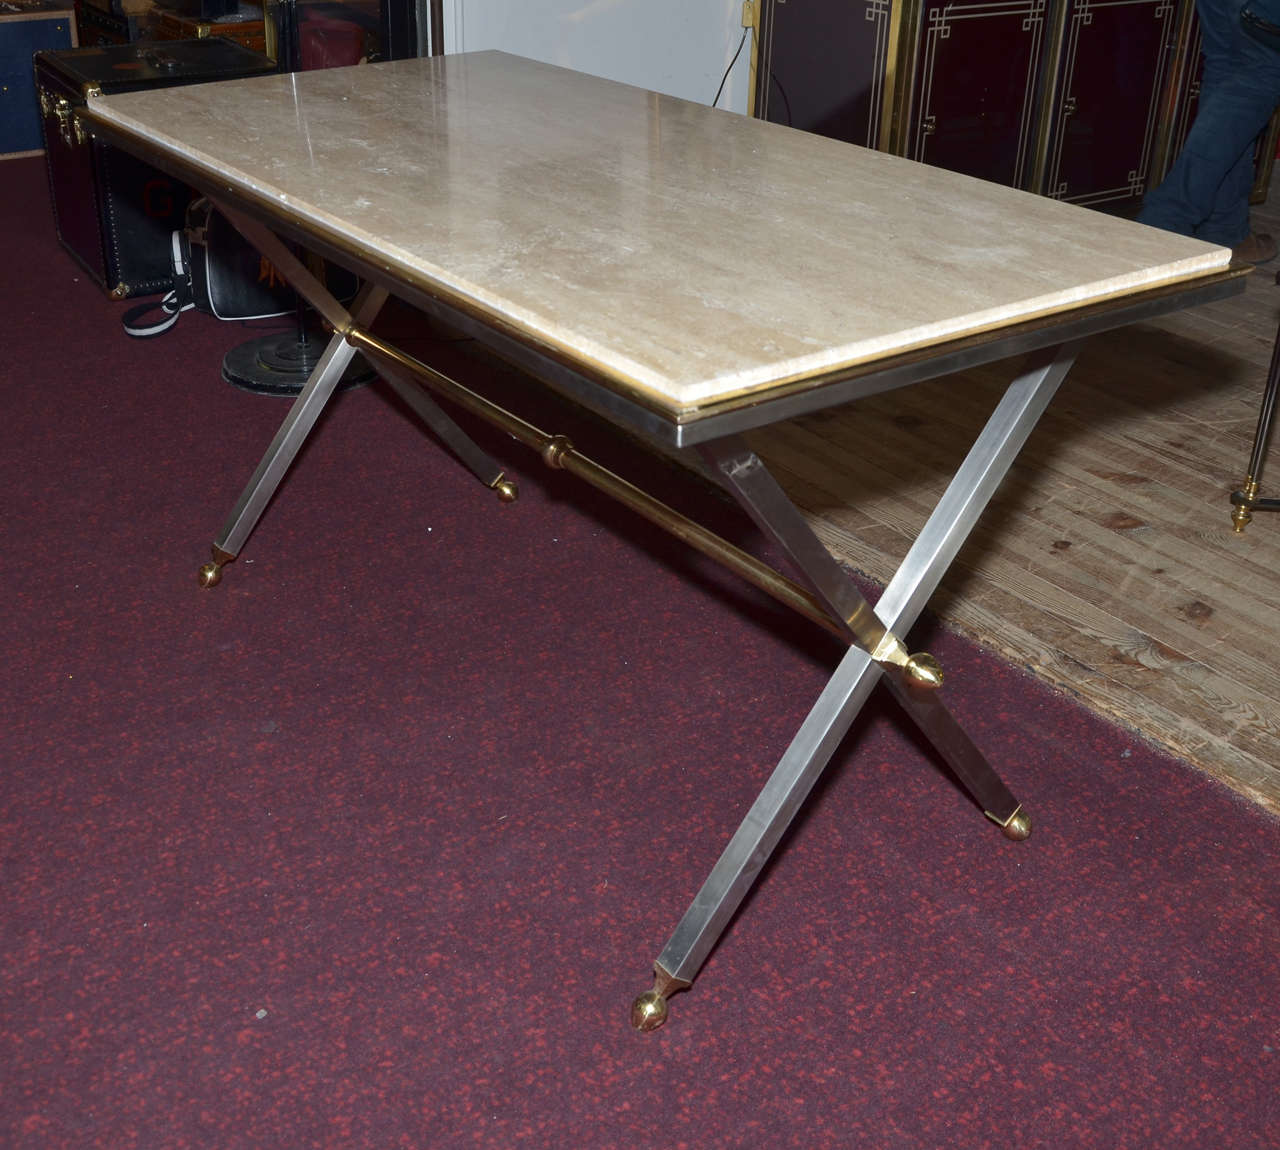 1970s console table with X-shaped base in brass, bronze and brushed steel; top surface in travertine.